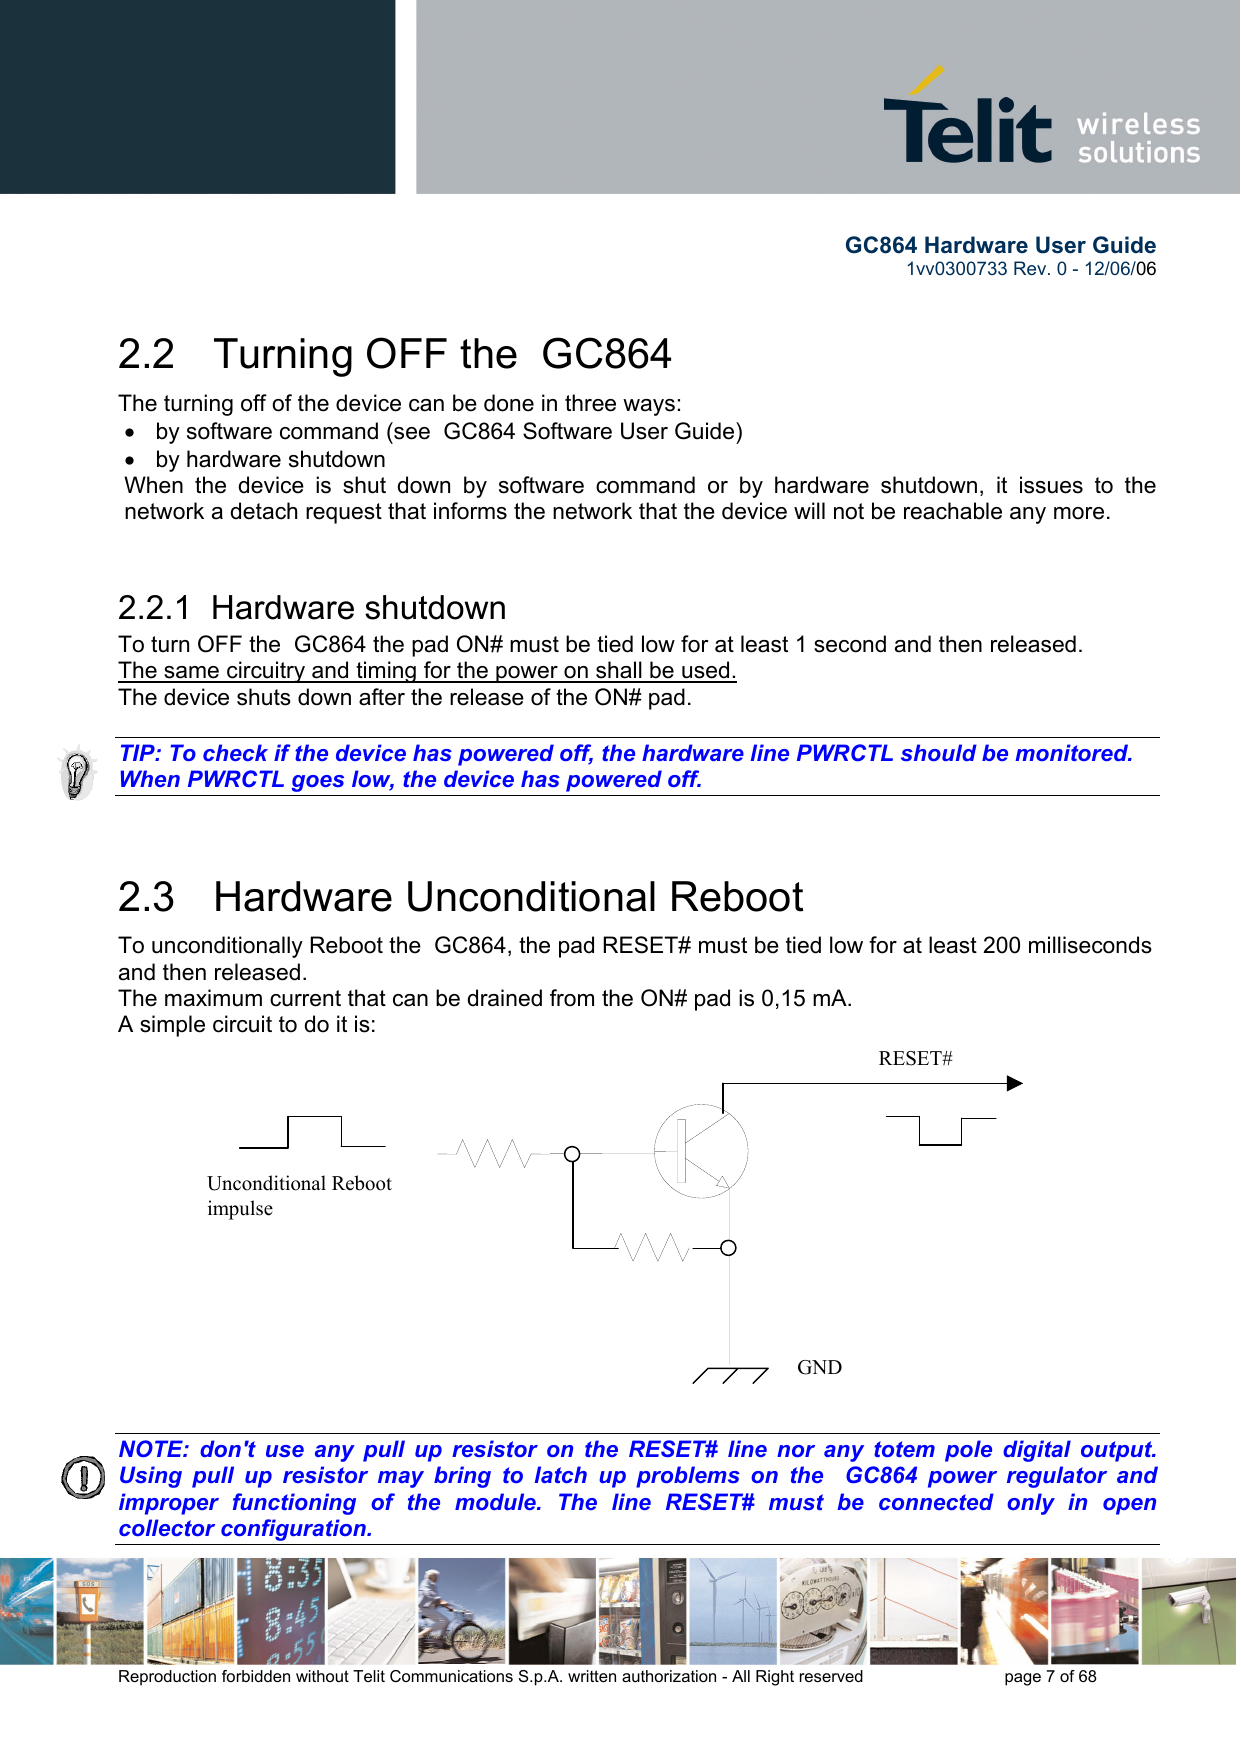        GC864 Hardware User Guide  1vv0300733 Rev. 0 - 12/06/06  Reproduction forbidden without Telit Communications S.p.A. written authorization - All Right reserved    page 7 of 68  2.2   Turning OFF the  GC864 The turning off of the device can be done in three ways: •  by software command (see  GC864 Software User Guide) •  by hardware shutdown When the device is shut down by software command or by hardware shutdown, it issues to the network a detach request that informs the network that the device will not be reachable any more.   2.2.1  Hardware shutdown To turn OFF the  GC864 the pad ON# must be tied low for at least 1 second and then released. The same circuitry and timing for the power on shall be used. The device shuts down after the release of the ON# pad.  TIP: To check if the device has powered off, the hardware line PWRCTL should be monitored. When PWRCTL goes low, the device has powered off.  2.3   Hardware Unconditional Reboot To unconditionally Reboot the  GC864, the pad RESET# must be tied low for at least 200 milliseconds and then released. The maximum current that can be drained from the ON# pad is 0,15 mA. A simple circuit to do it is:                NOTE: don&apos;t use any pull up resistor on the RESET# line nor any totem pole digital output. Using pull up resistor may bring to latch up problems on the  GC864 power regulator and improper functioning of the module. The line RESET# must be connected only in open collector configuration.   RESET# Unconditional Reboot impulse   GND